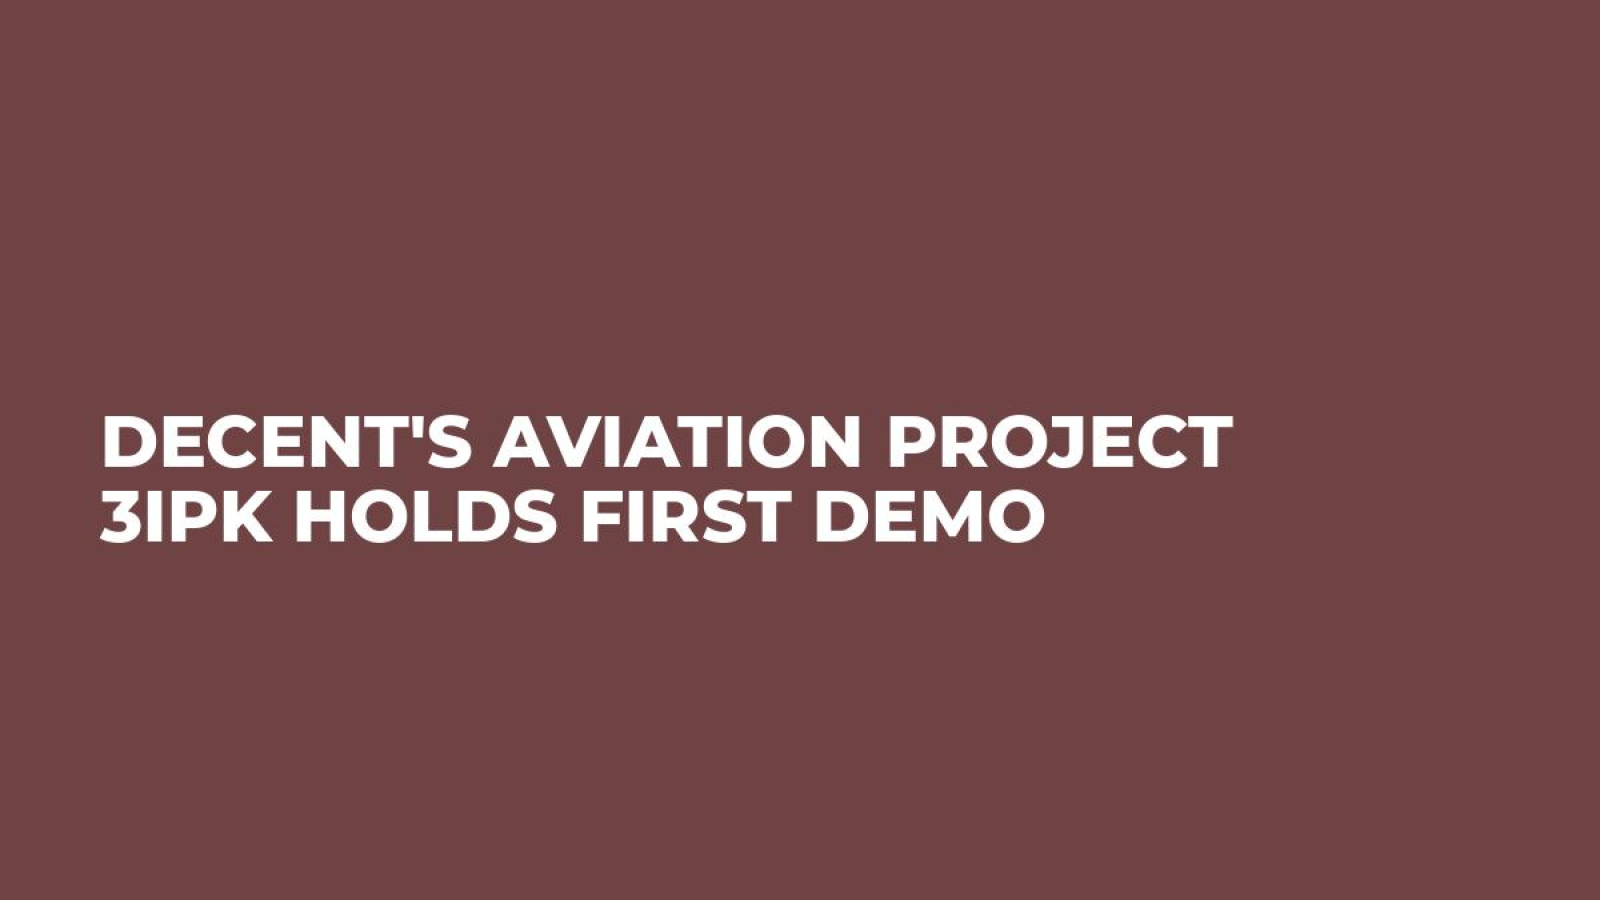 DECENT's Aviation Project 3IPK Holds First Demo